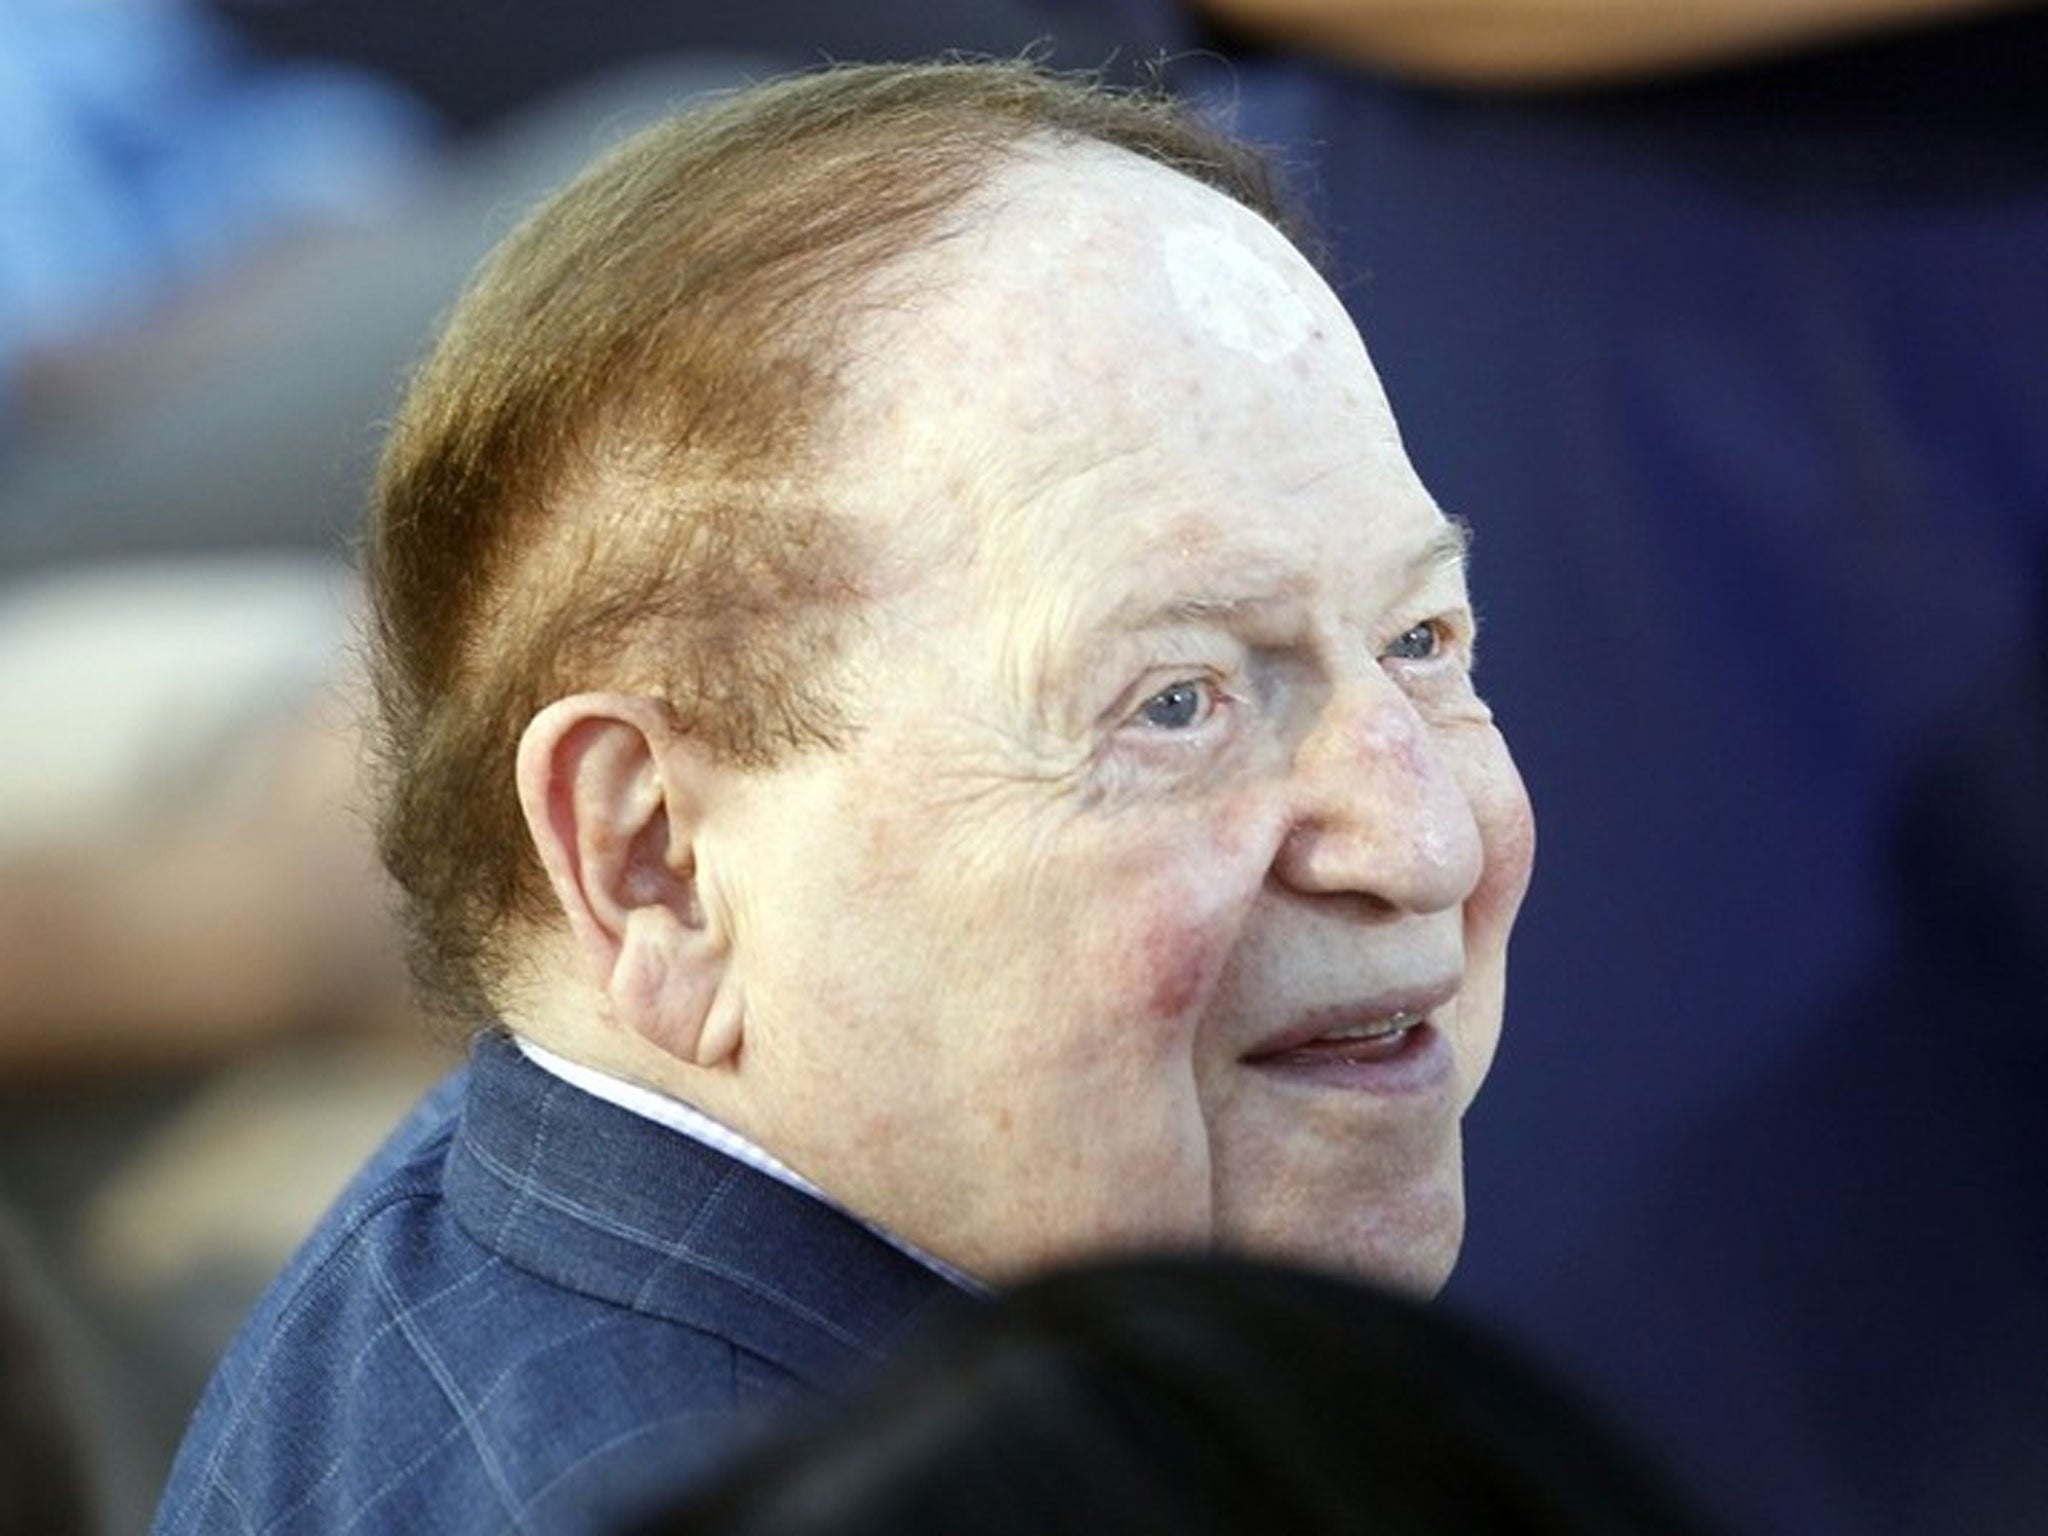 Billionaire casino tycoon Sheldon Adelson’s fortune sank by the most of any Trump donor